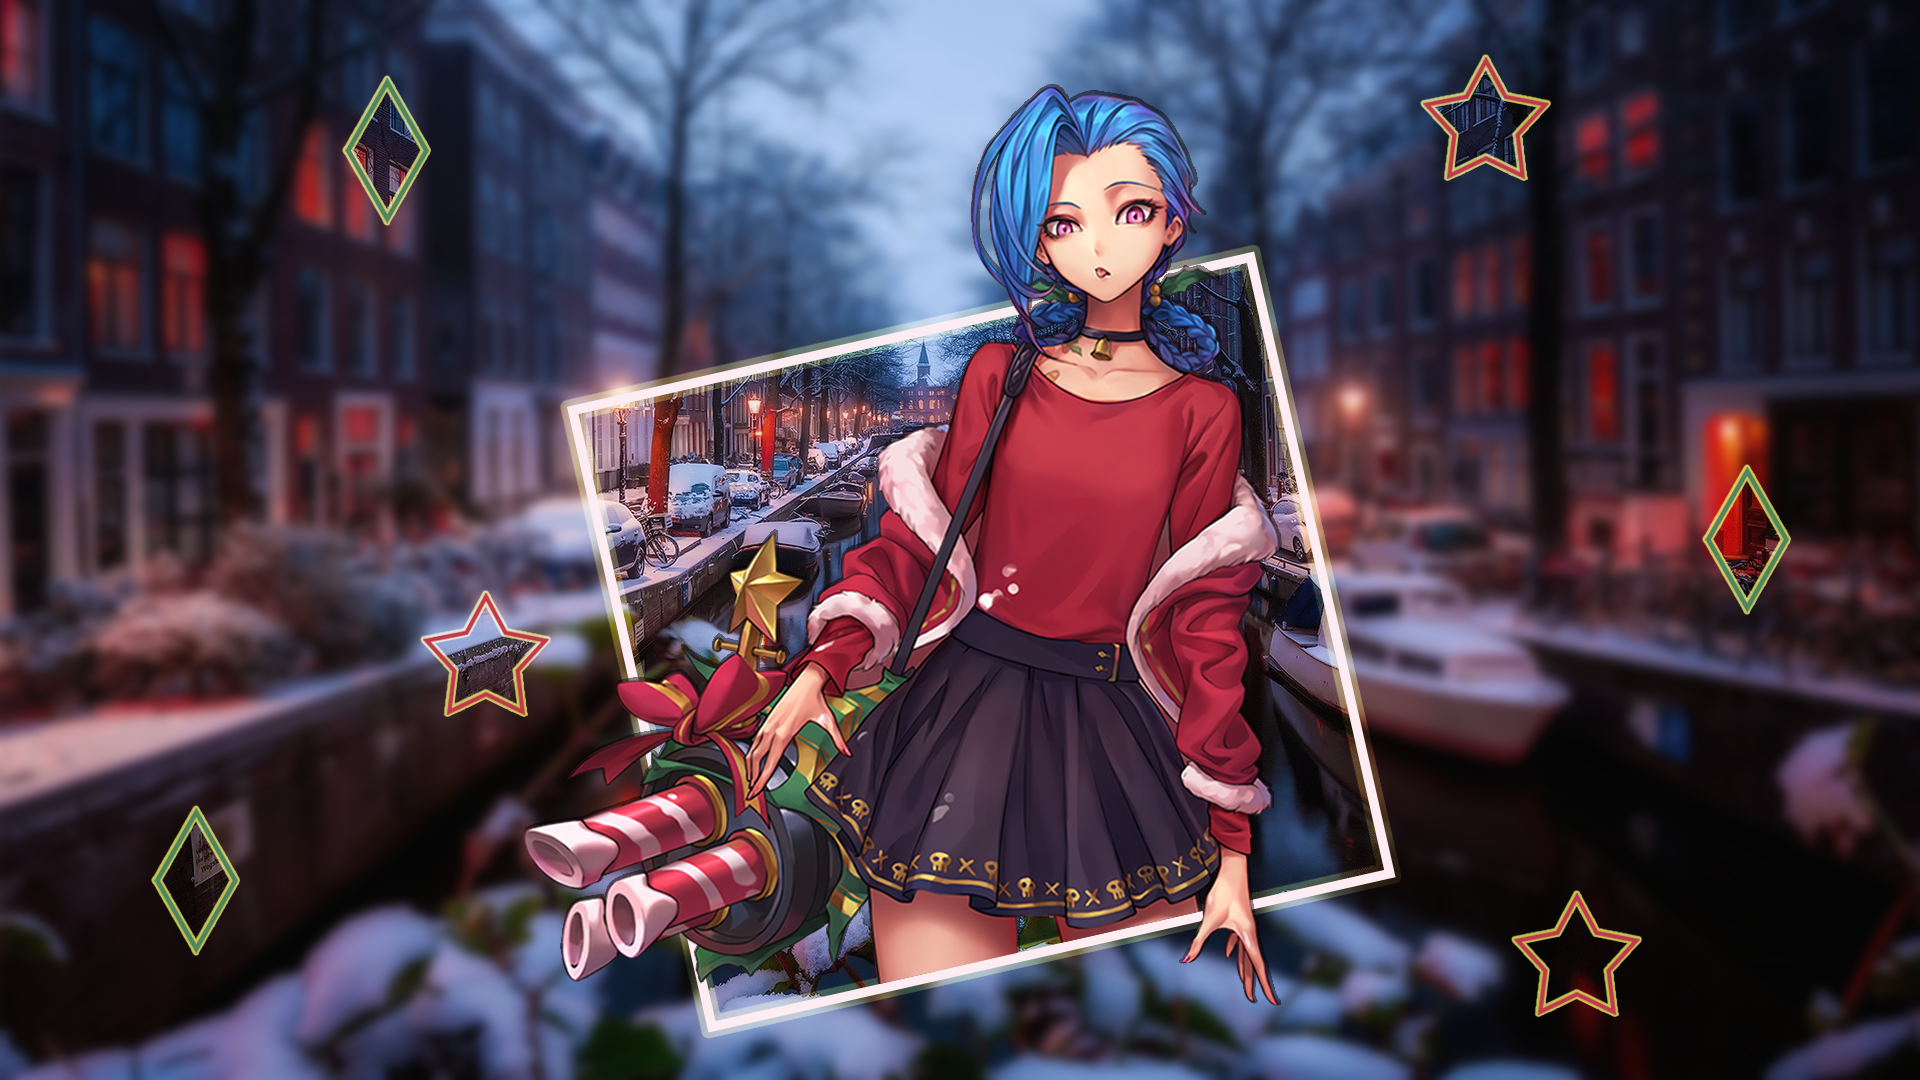 Picture In Picture Jinx League Of Legends Christmas River 1920x1080